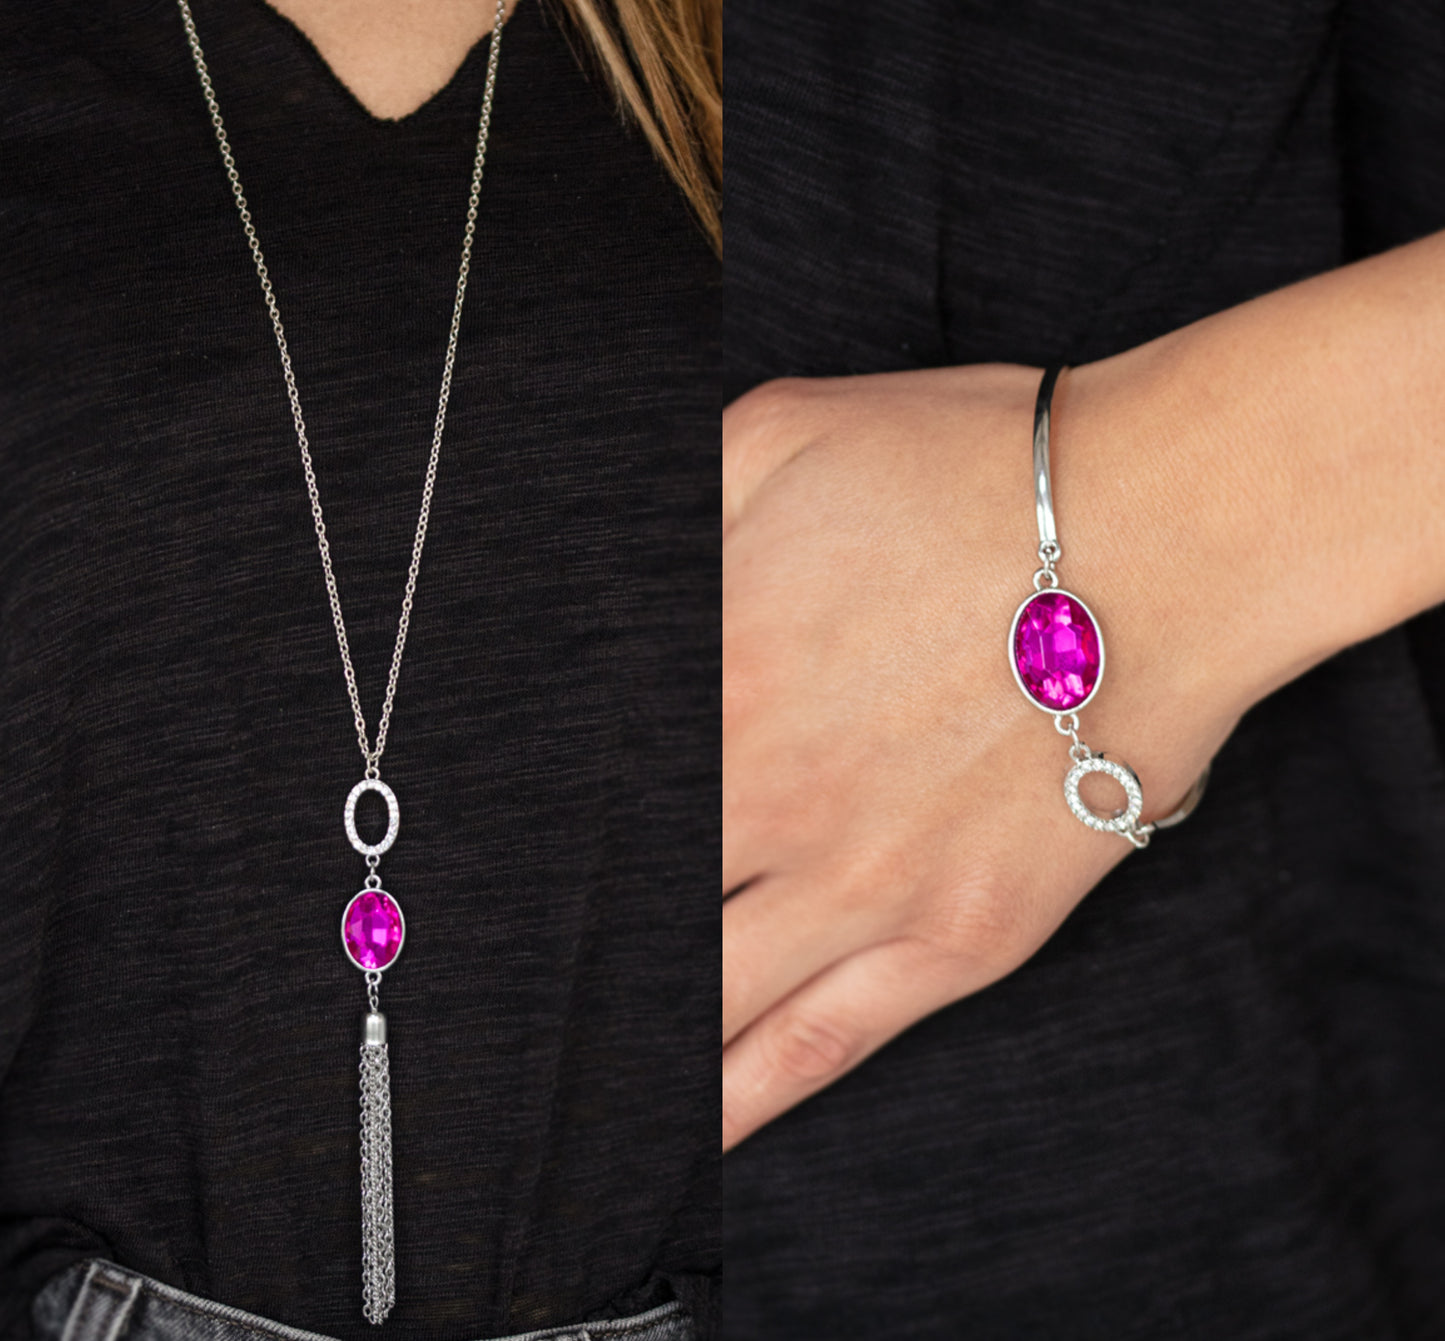 Unstoppable Glamour - Pink necklace w/ matching bracelet